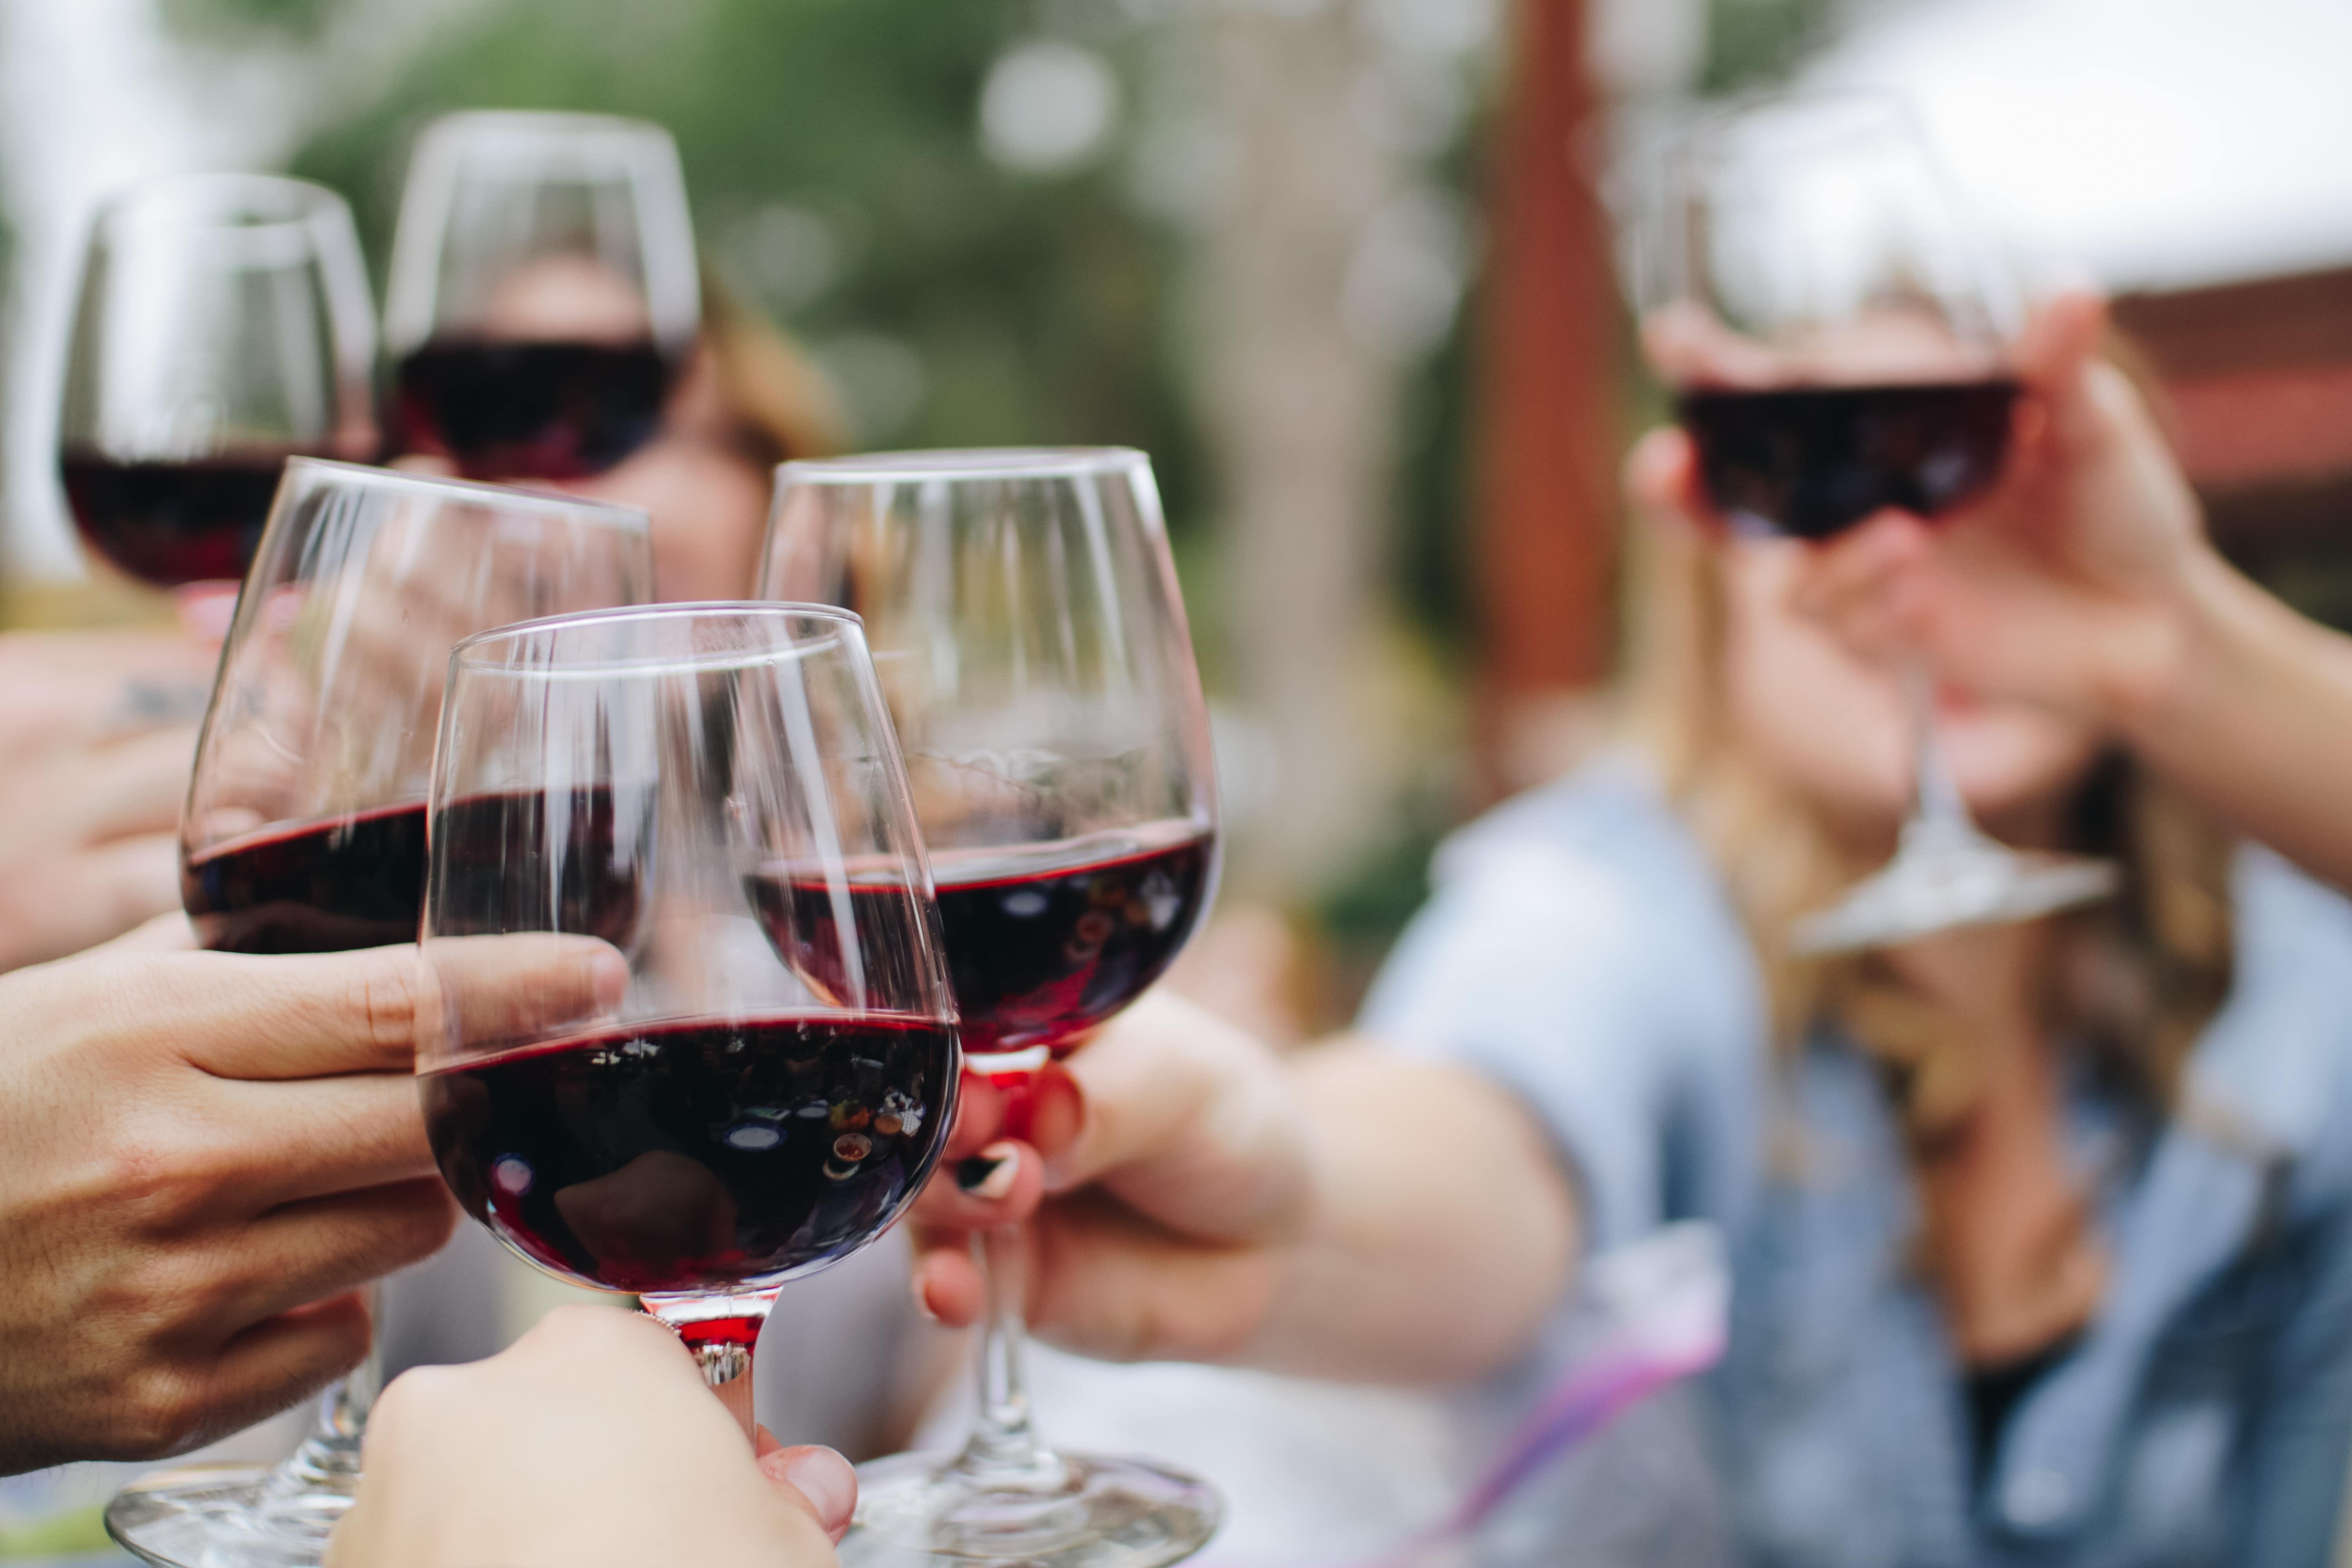 6 people holding glasses of red wine and toasting, selective focus